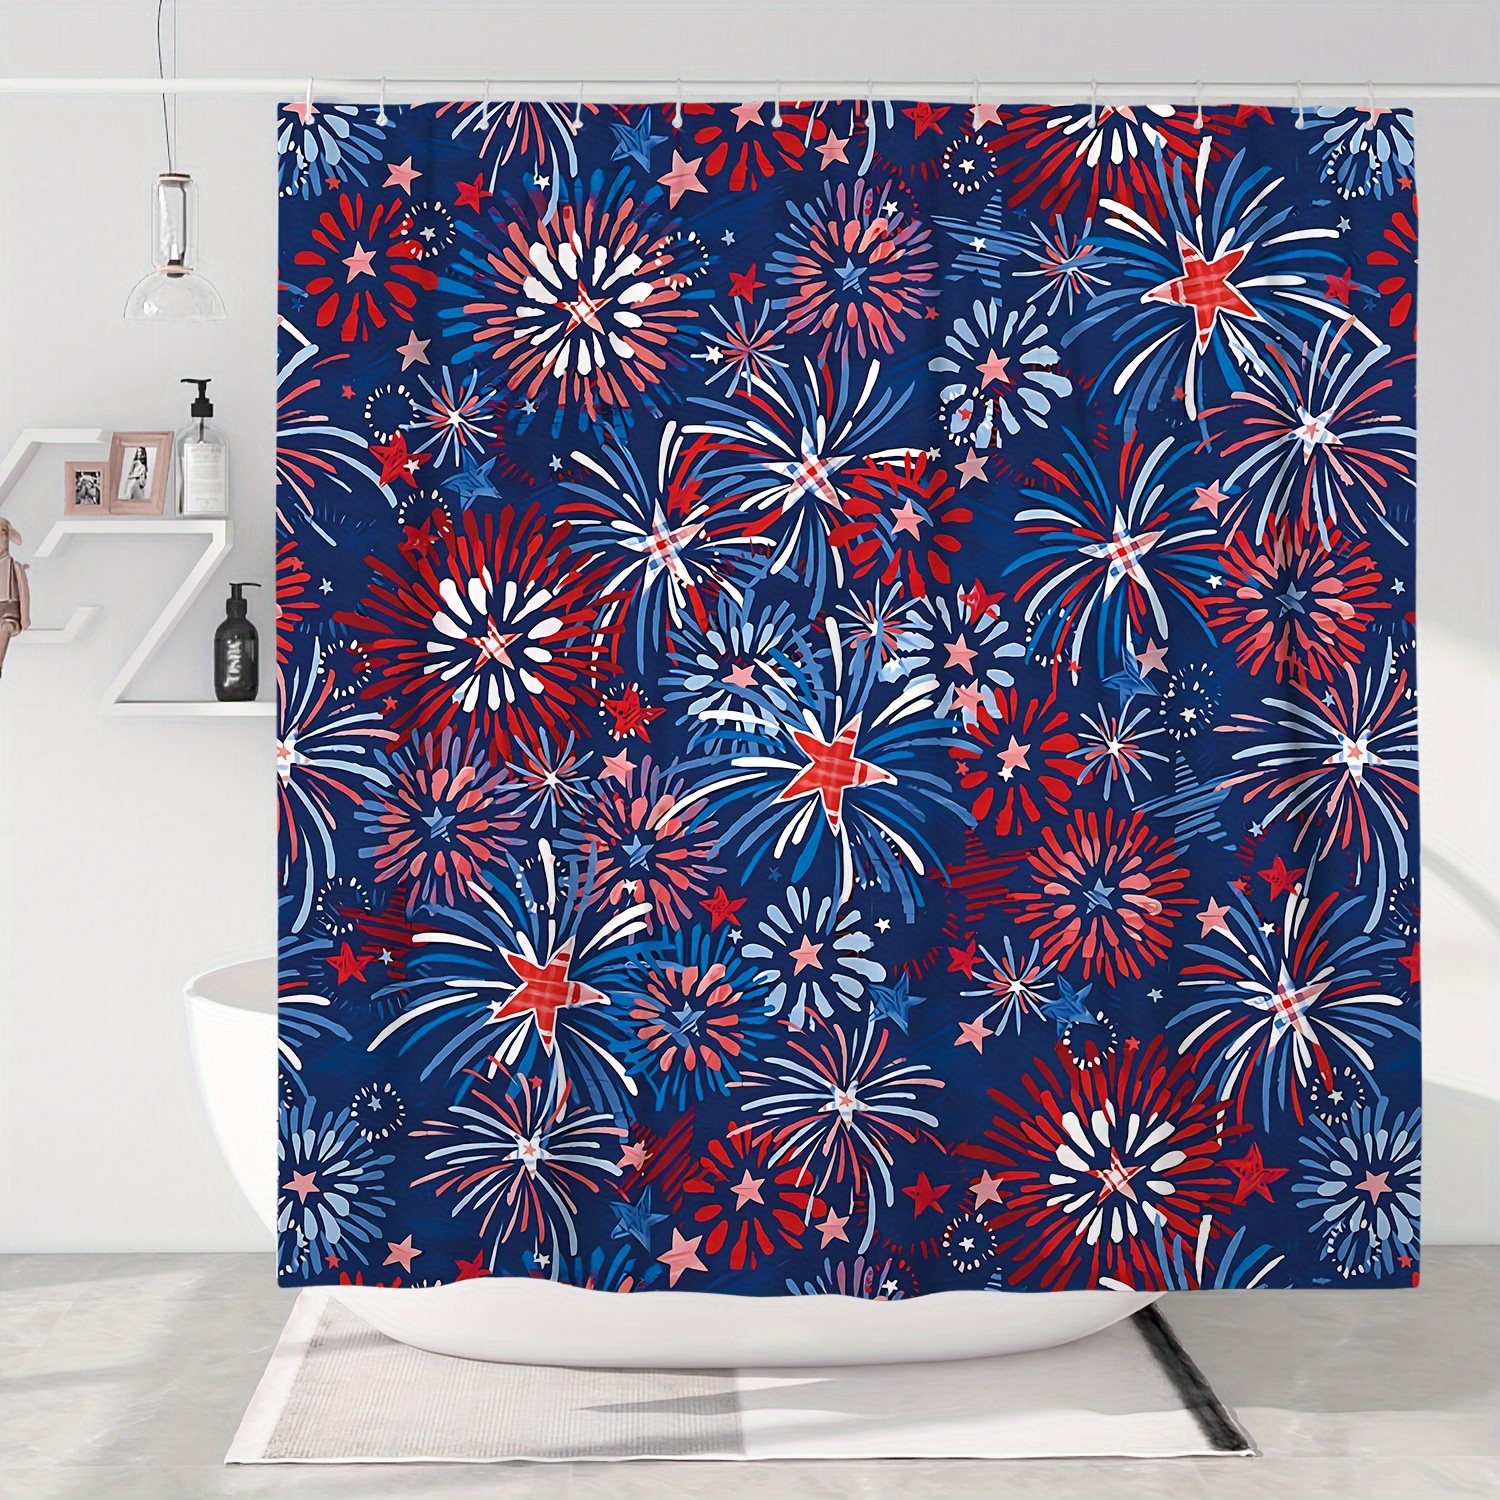 

4th Of July Patriotic Shower Curtain - Waterproof Polyester With Fireworks & Stars Design, 71x71 Inches, Includes 12 Hooks, Machine Washable - Perfect For Independence Day Bathroom Decor